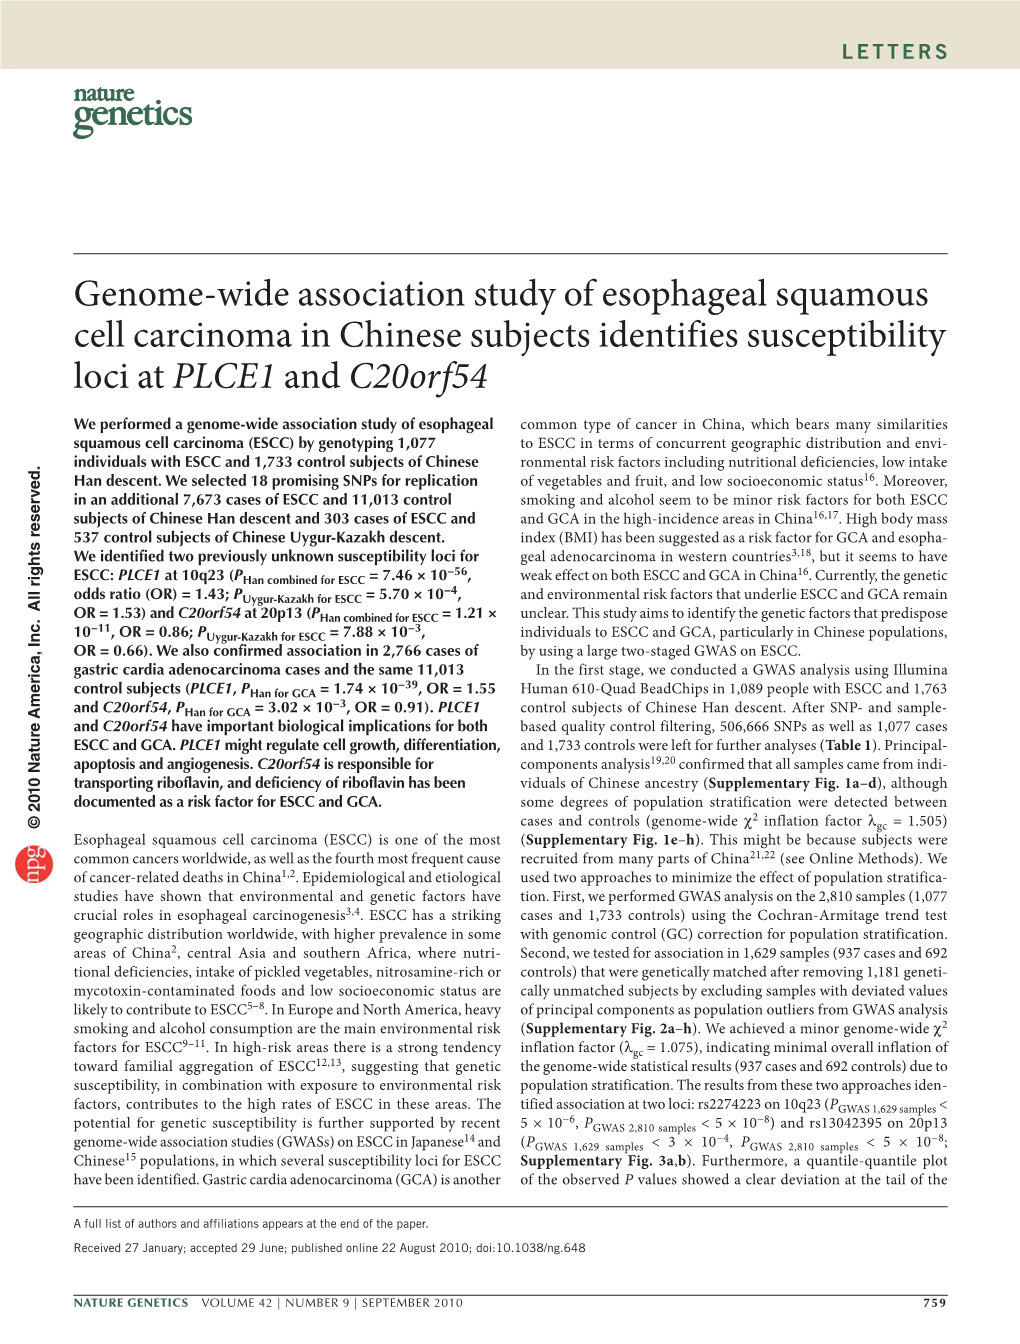 Genome-Wide Association Study of Esophageal Squamous Cell Carcinoma in Chinese Subjects Identifies Susceptibility Loci at PLCE1 and C20orf54